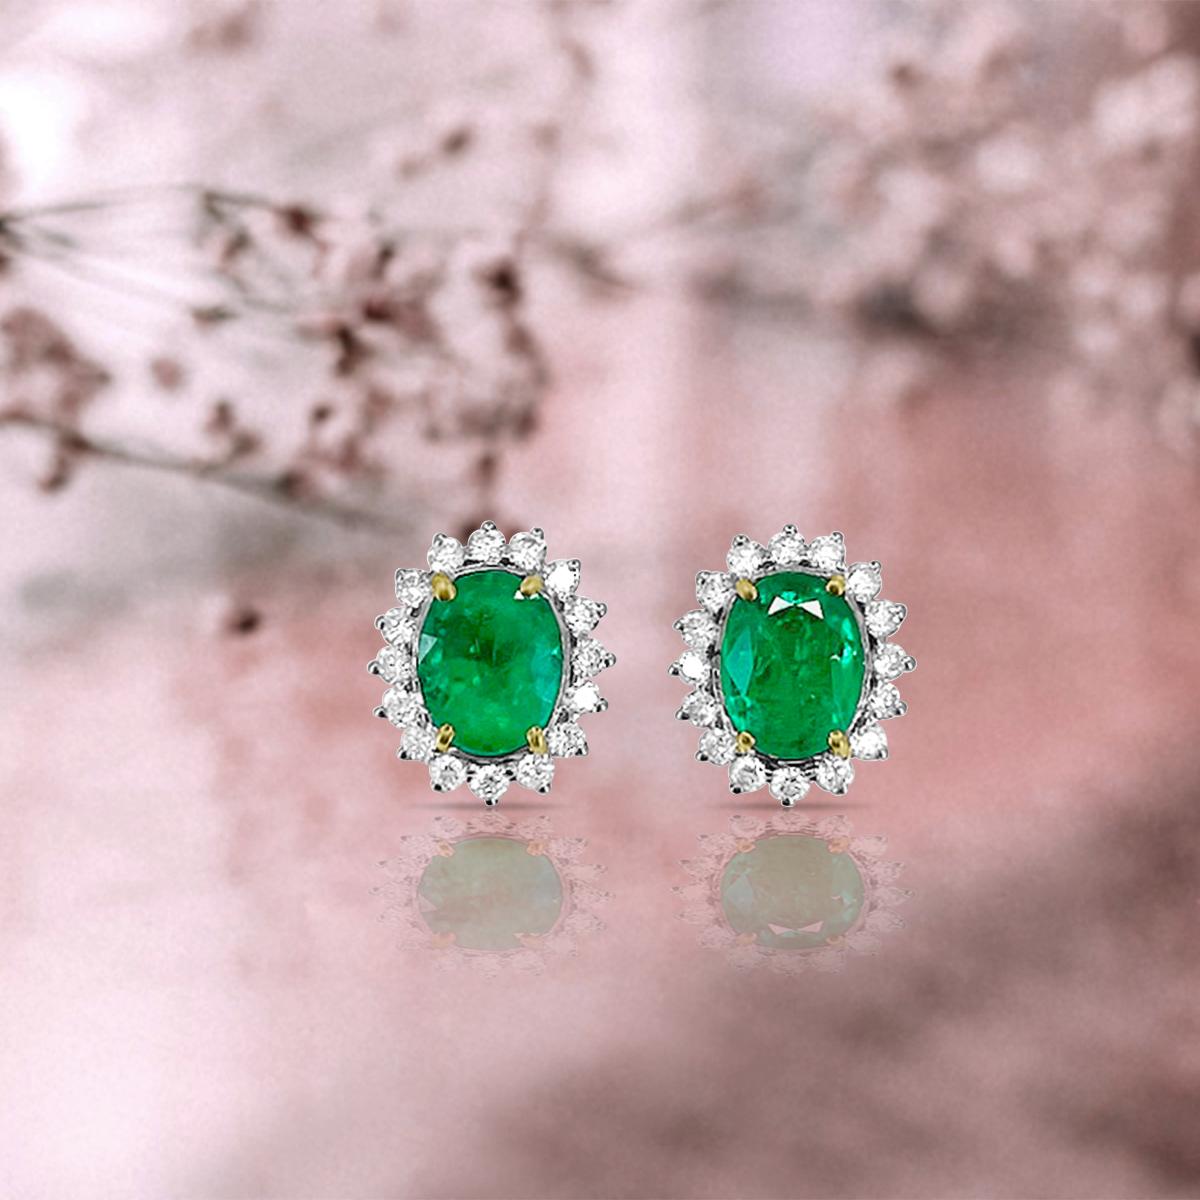 Modern 18K White Gold 2.64cts Emerald and Diamond Earring. Style# TS8128E For Sale